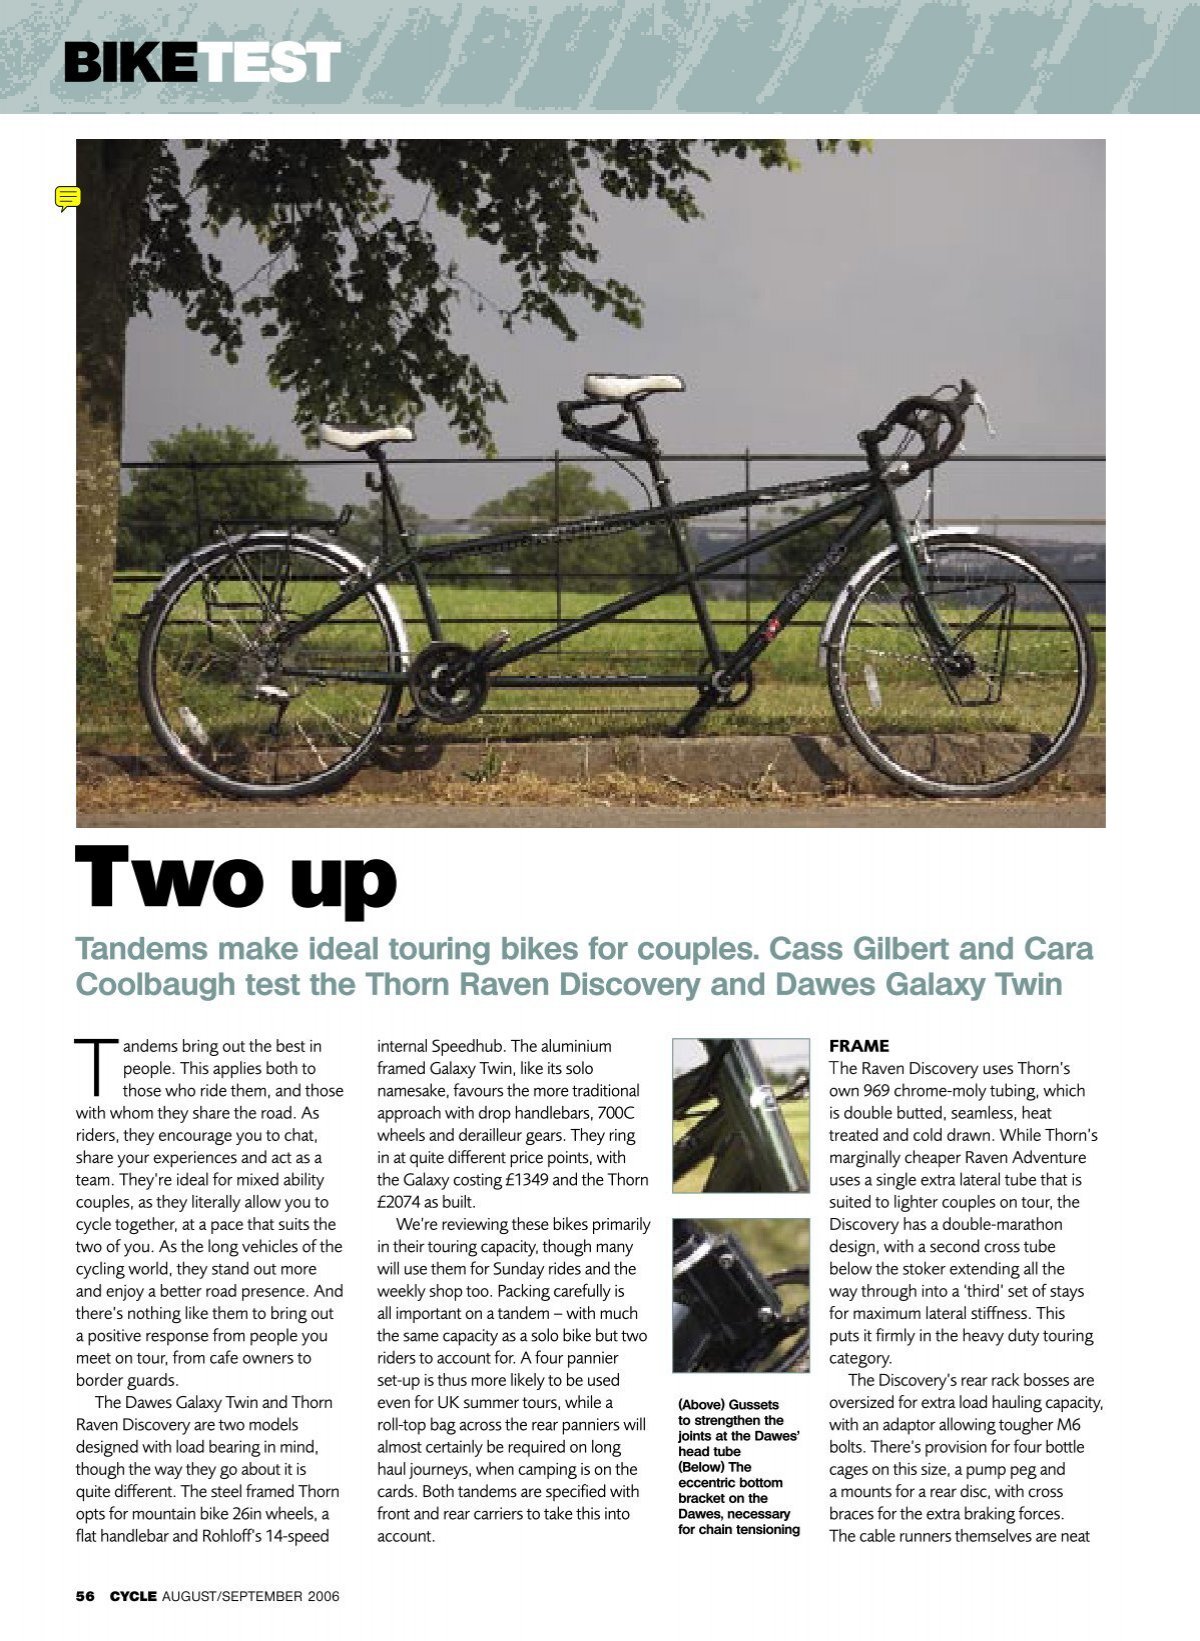 dawes discovery twin tandem